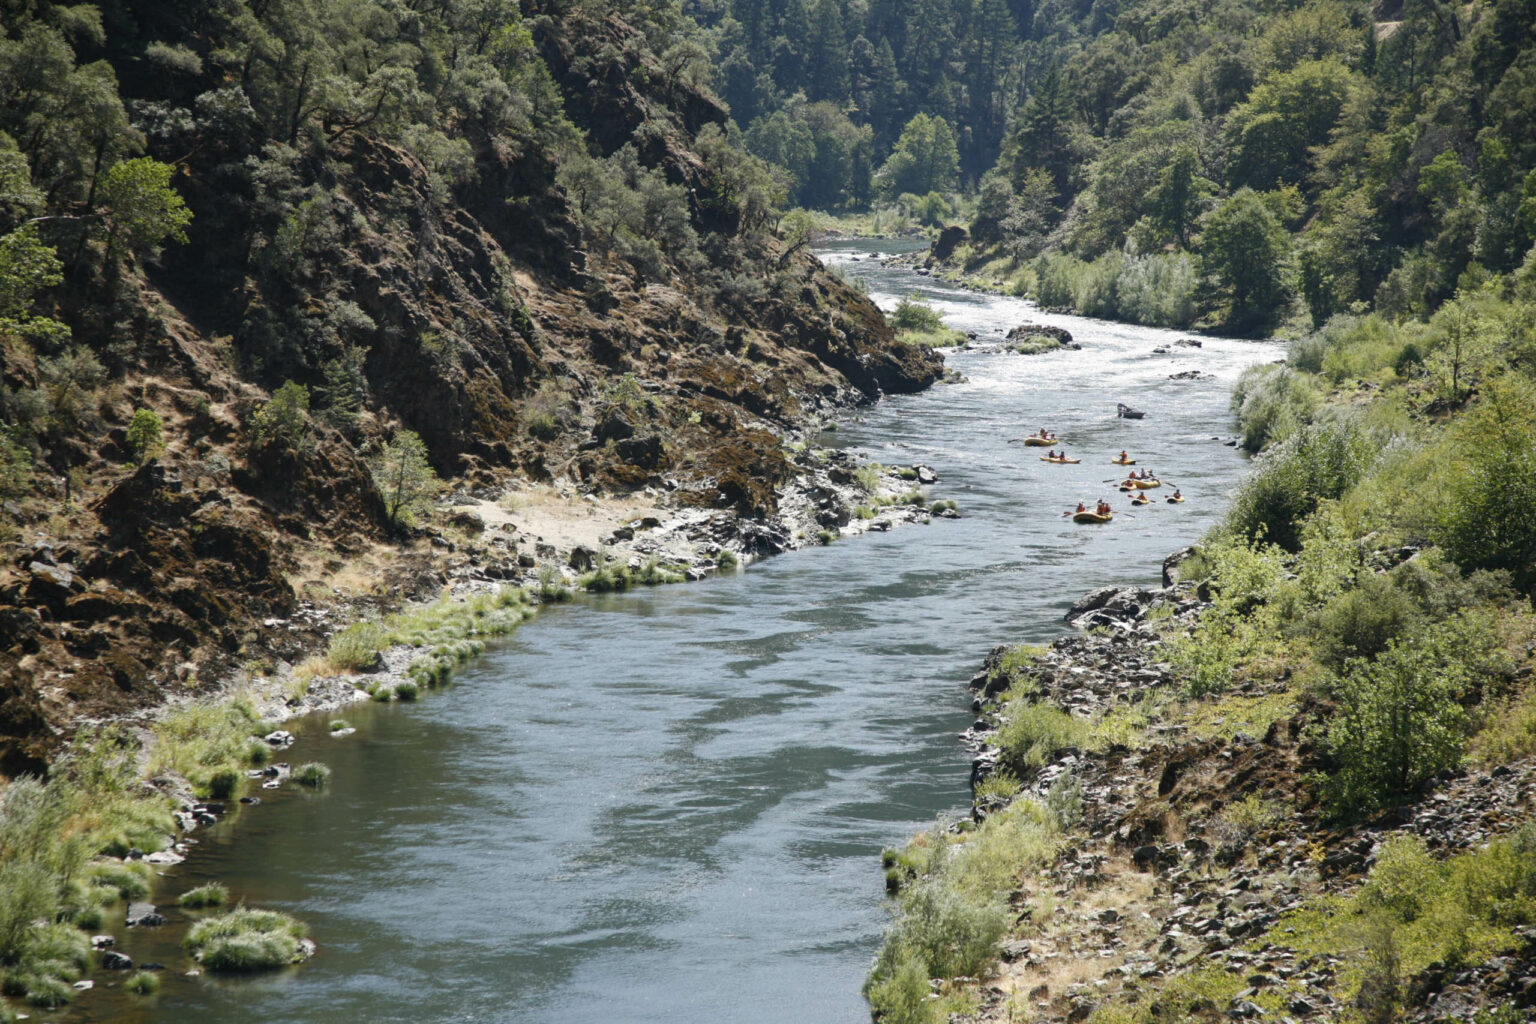 The rogue river in Oregon.